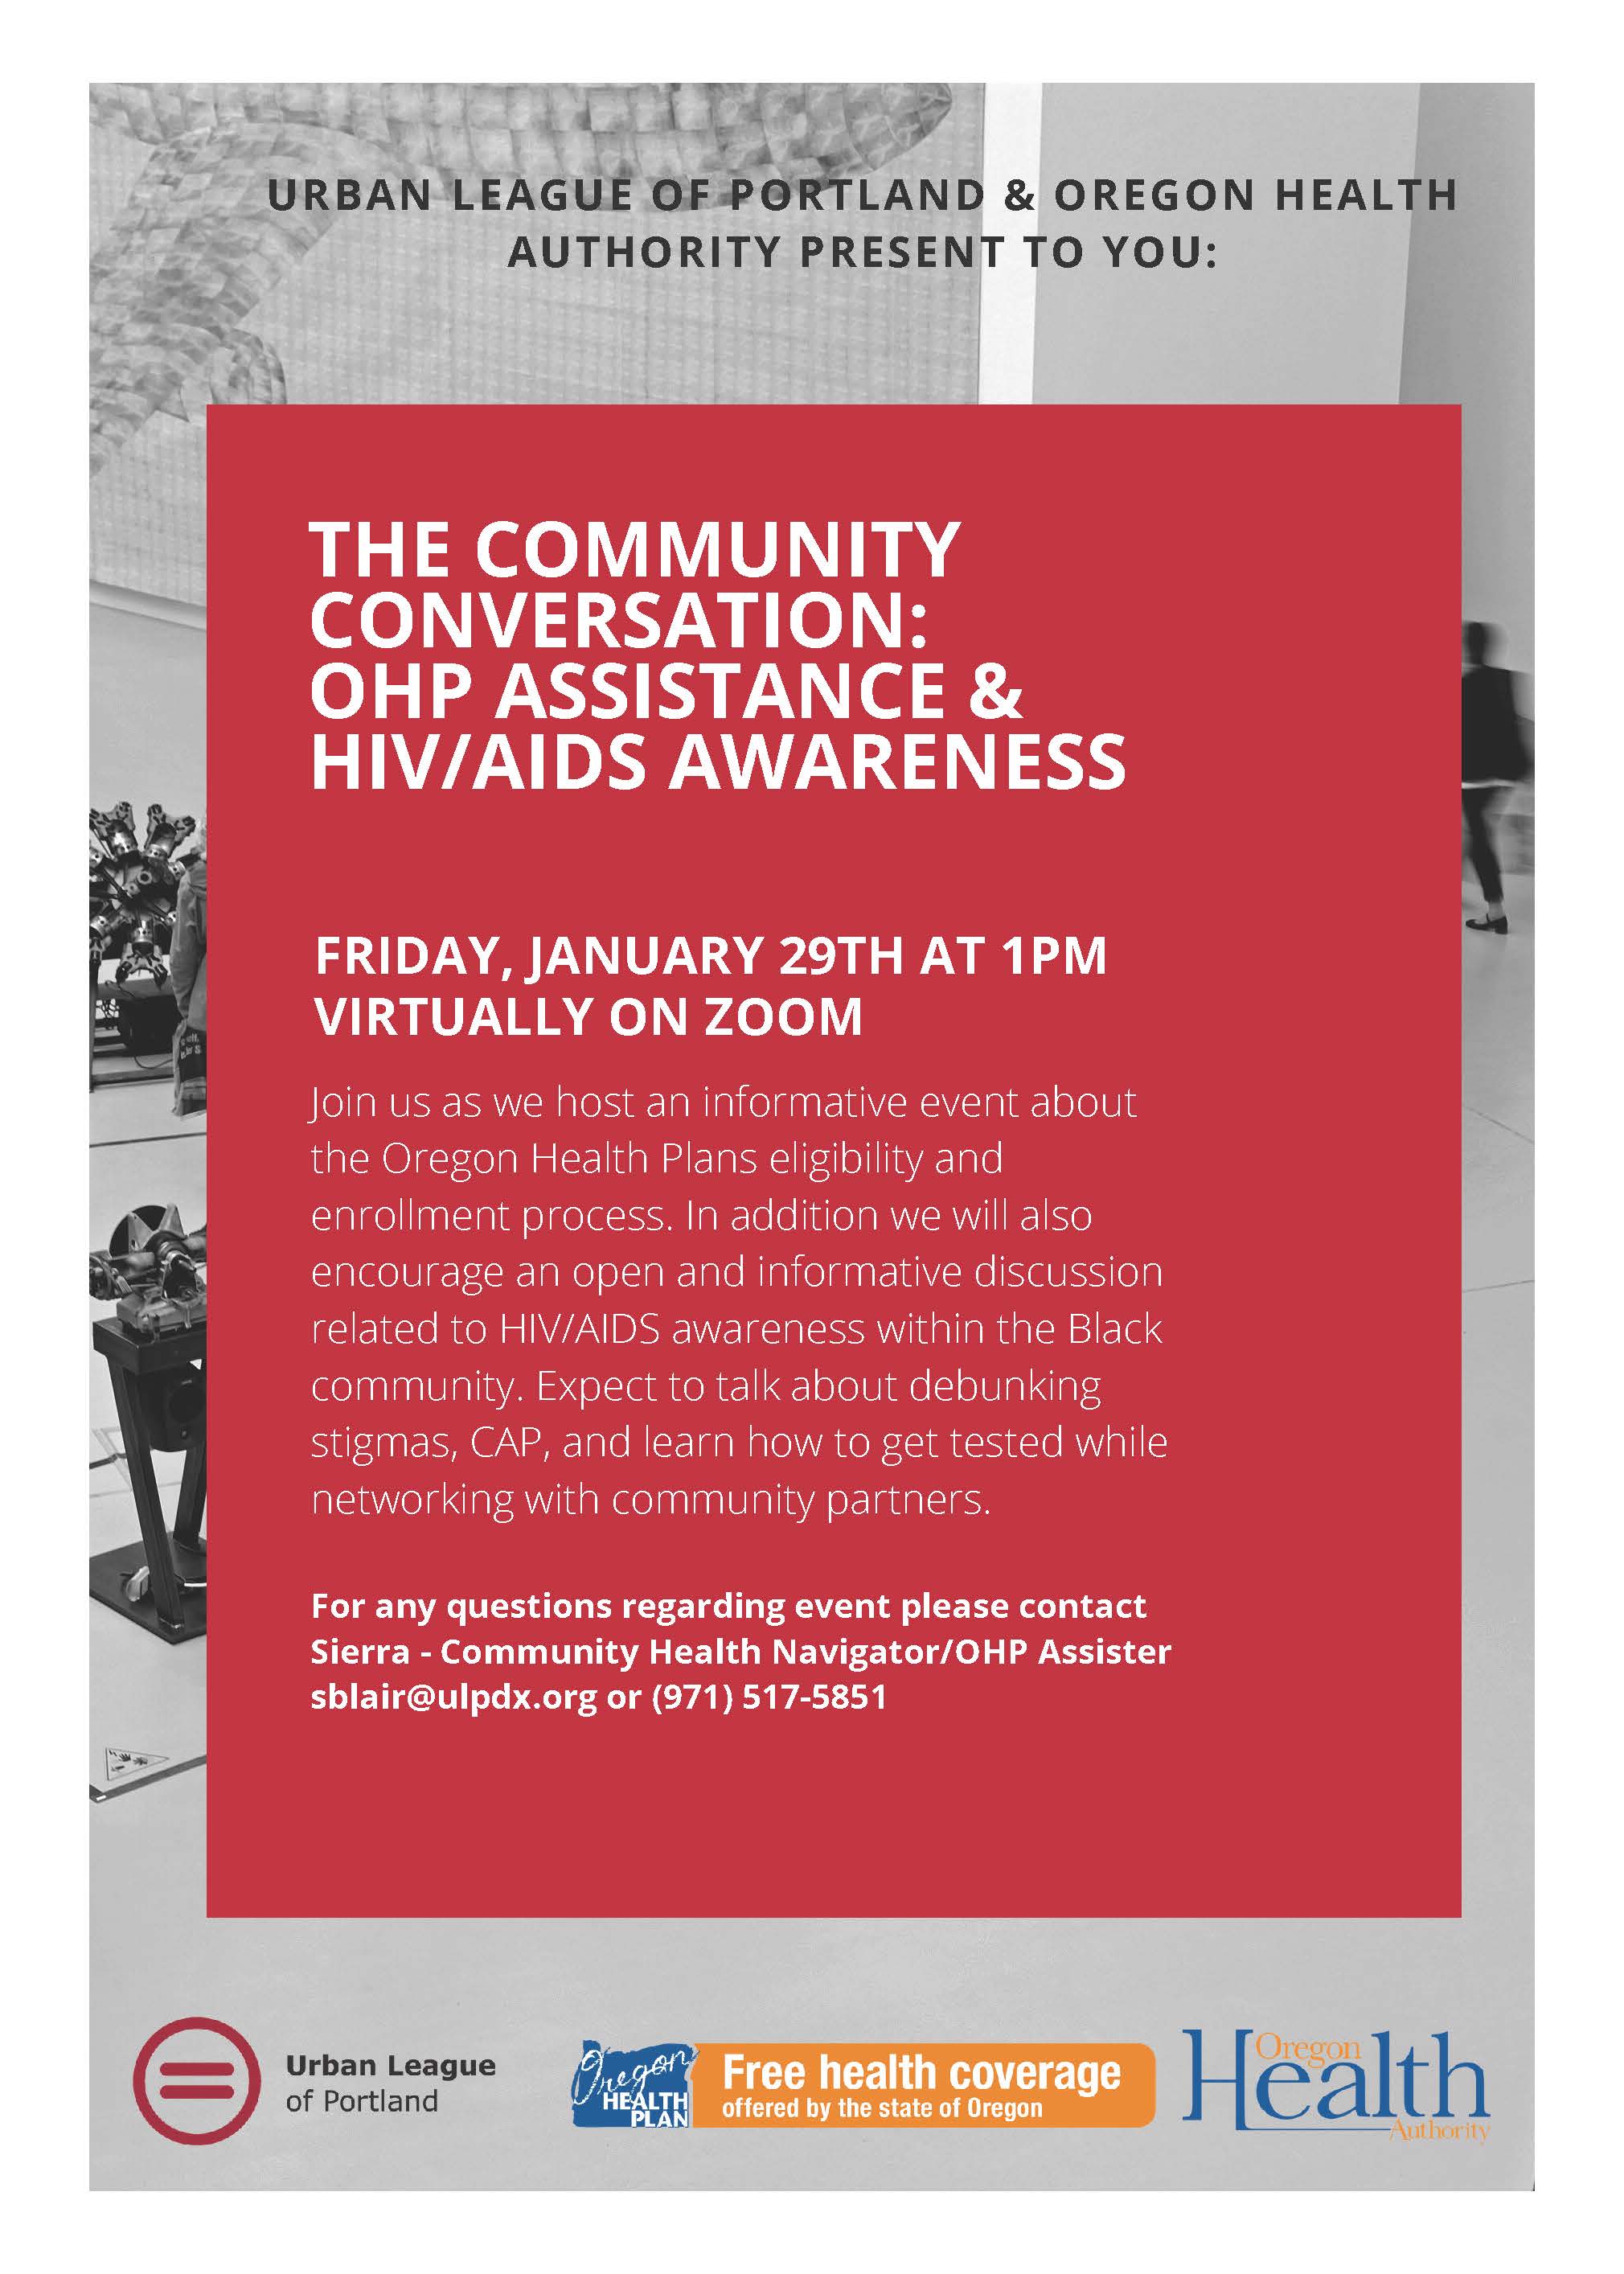 Please join the Urban League of Portland OHP Assister for a community discussion on January 29th.  This will be the first of many Community Conversations led by the Urban League focused on Health.  The topics that will be discuss are OHP, HIV education, Breast Cancer and COVID impacting the Black community.    This event is in collaboration with Oregon Health Authority's Black/African American Community Outreach and Engagement Coordinator. This forum is an informal way to keep our community connected with H